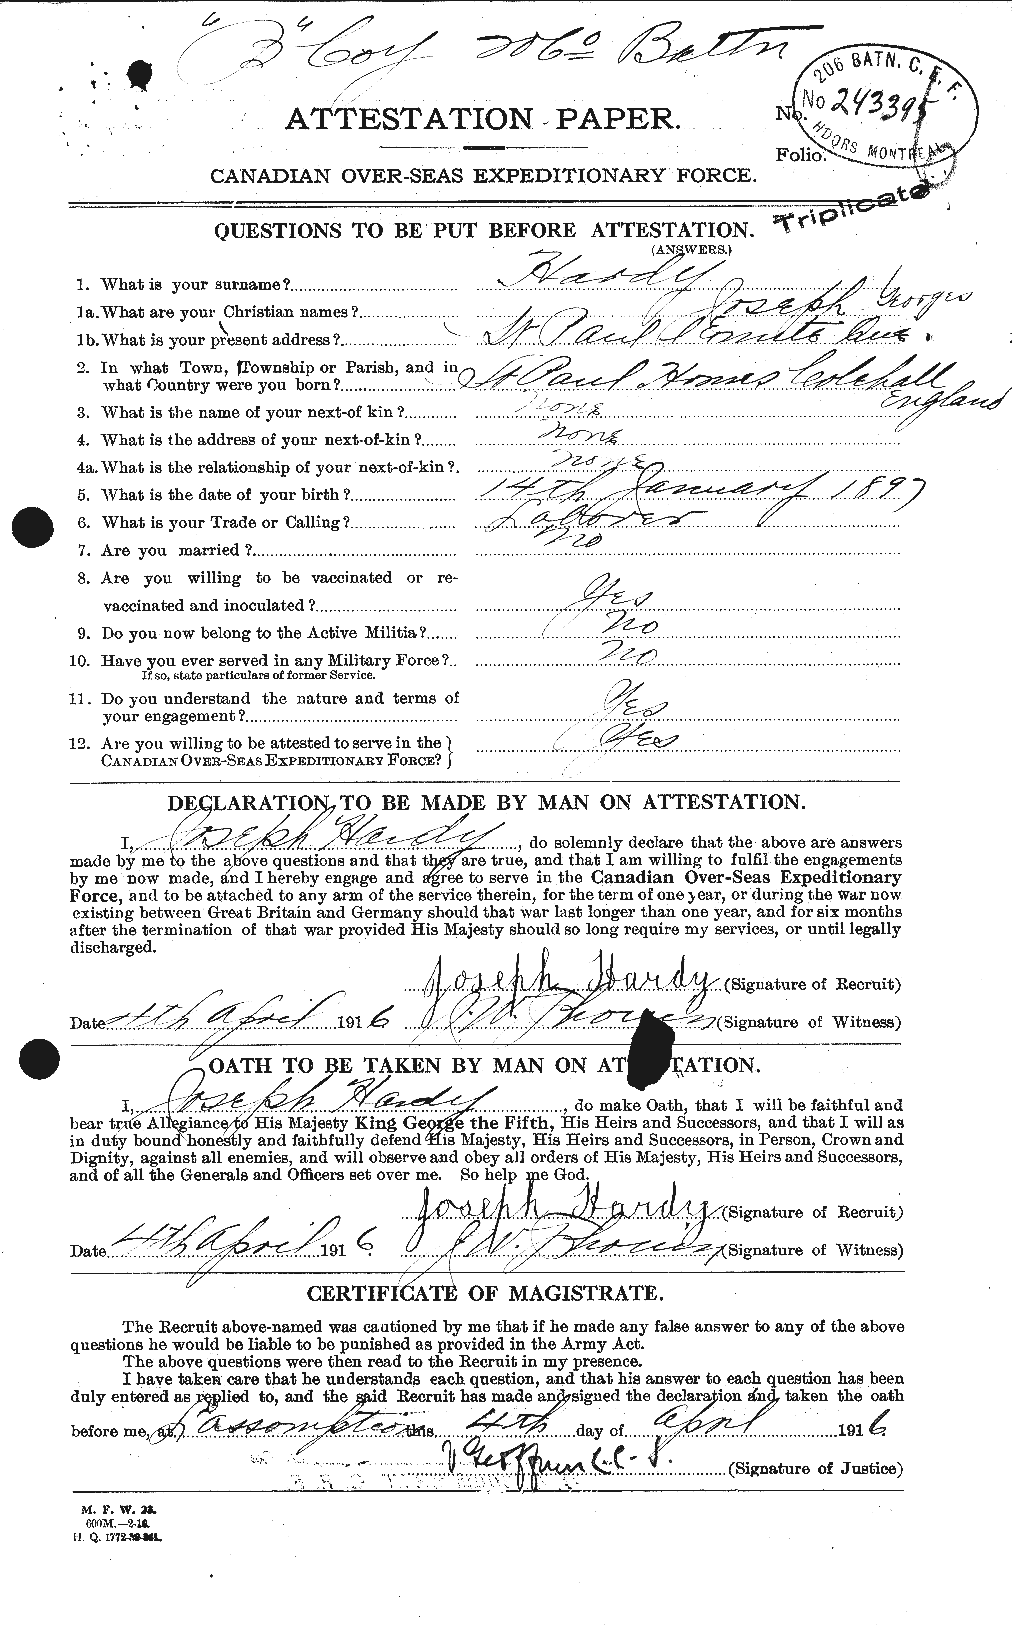 Personnel Records of the First World War - CEF 377784a